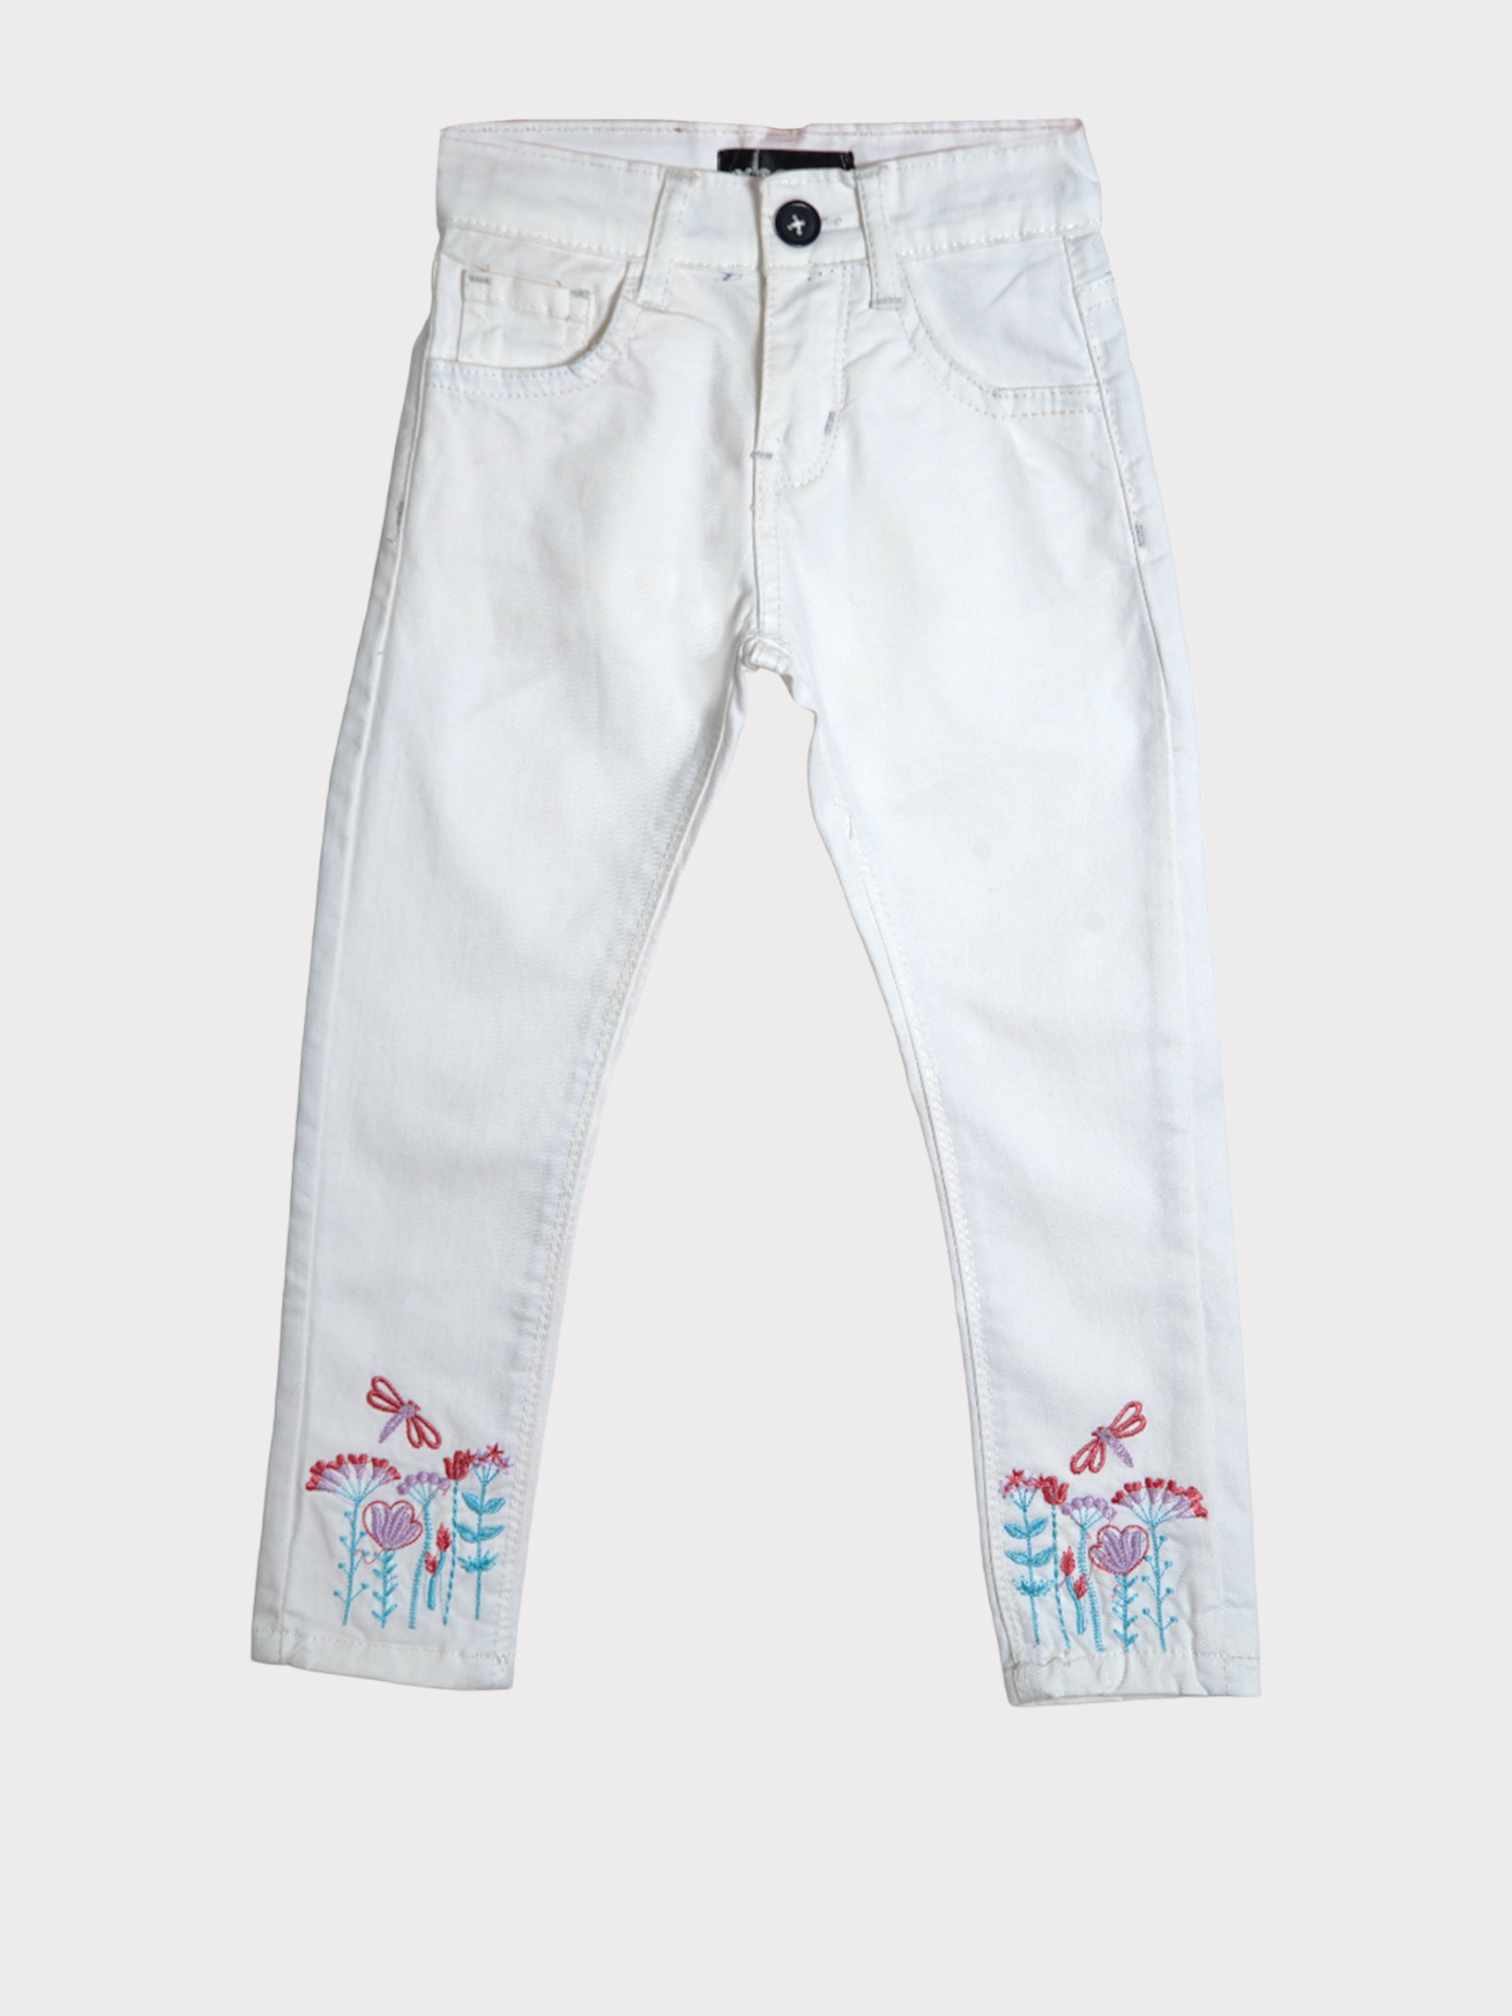 WHITE EMBROIDERED COTTON PANT